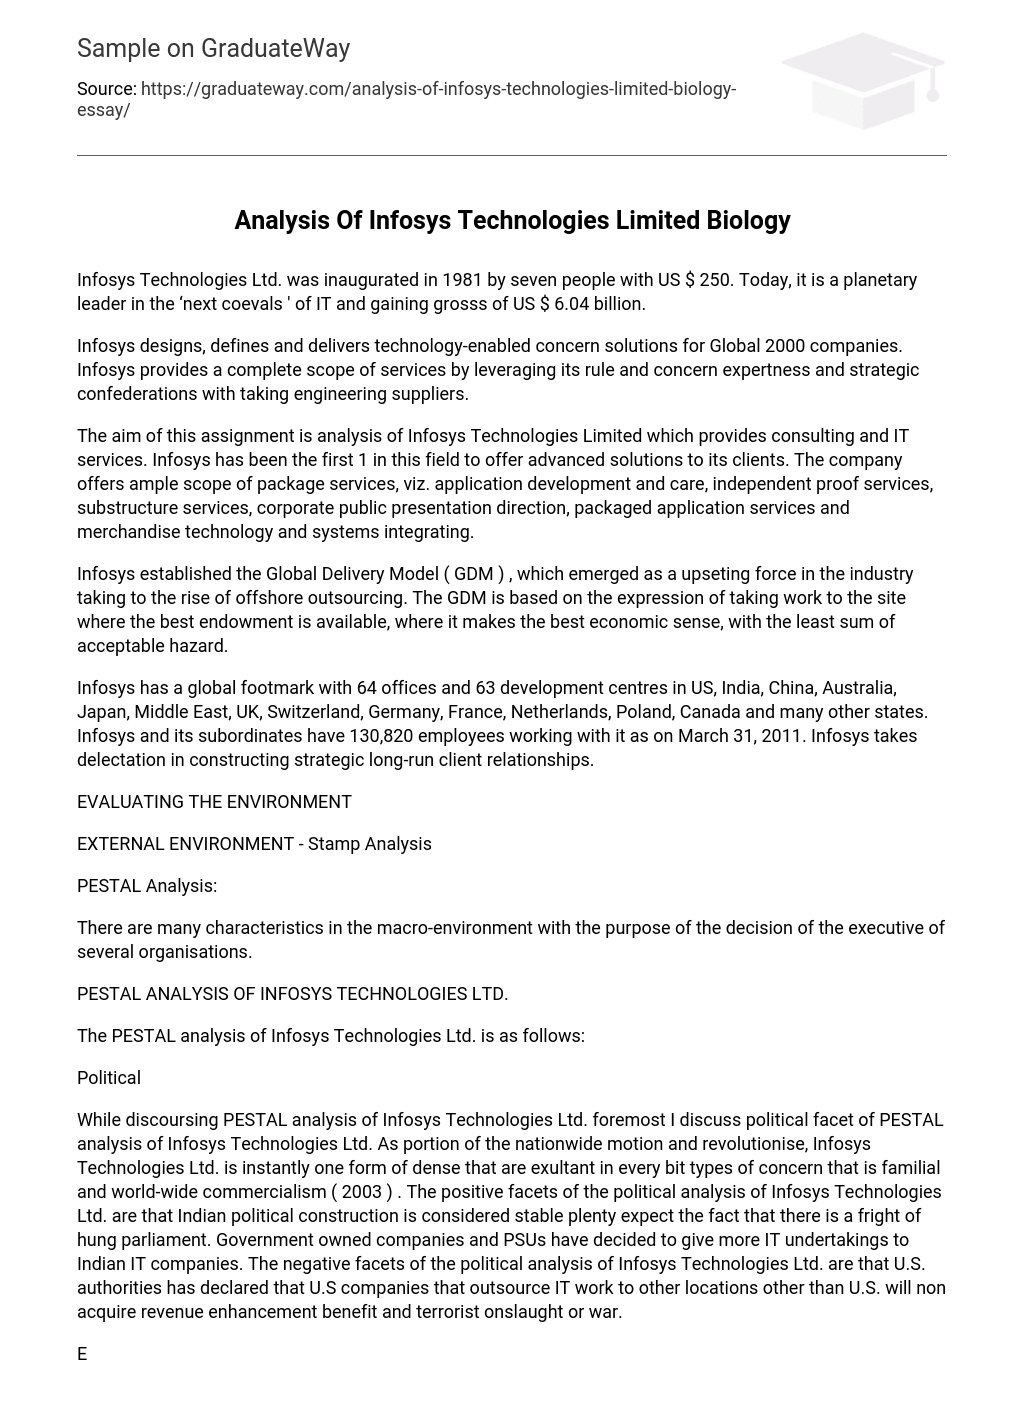 Analysis Of Infosys Technologies Limited Biology